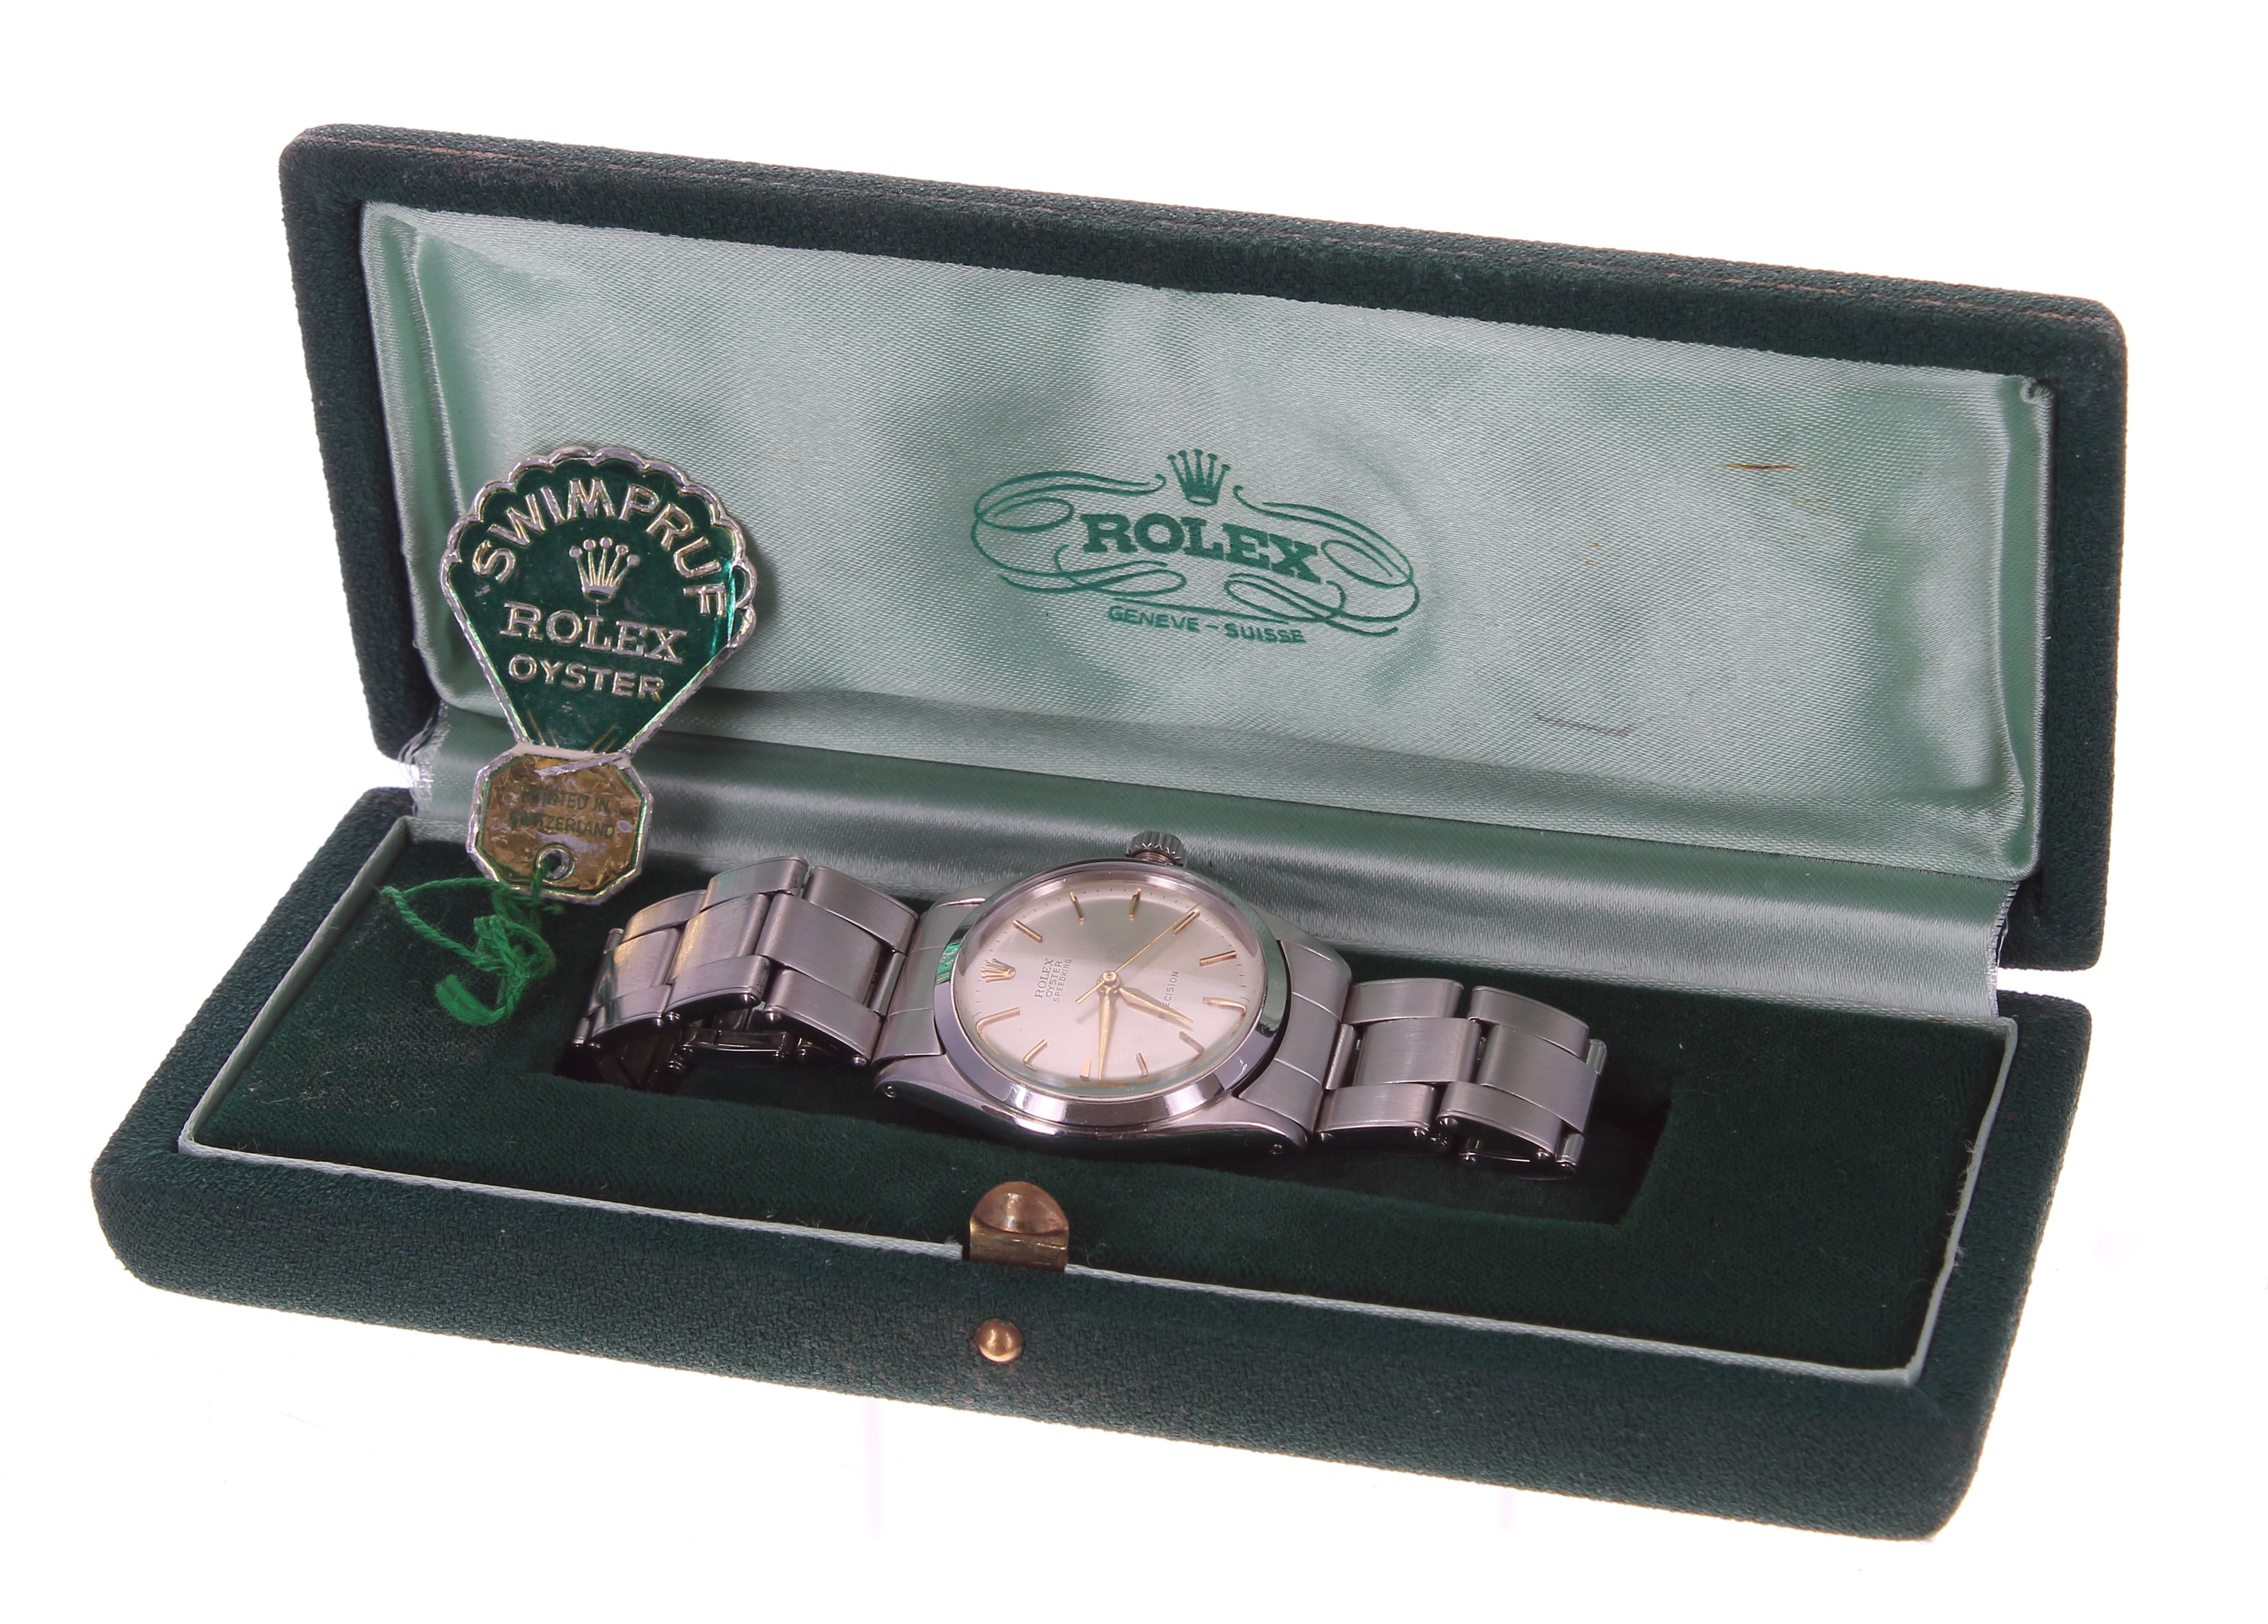 Rolex Oyster Speedking Precision stainless steel mid-size wristwatch, reference no. 6430, serial no. - Image 3 of 4